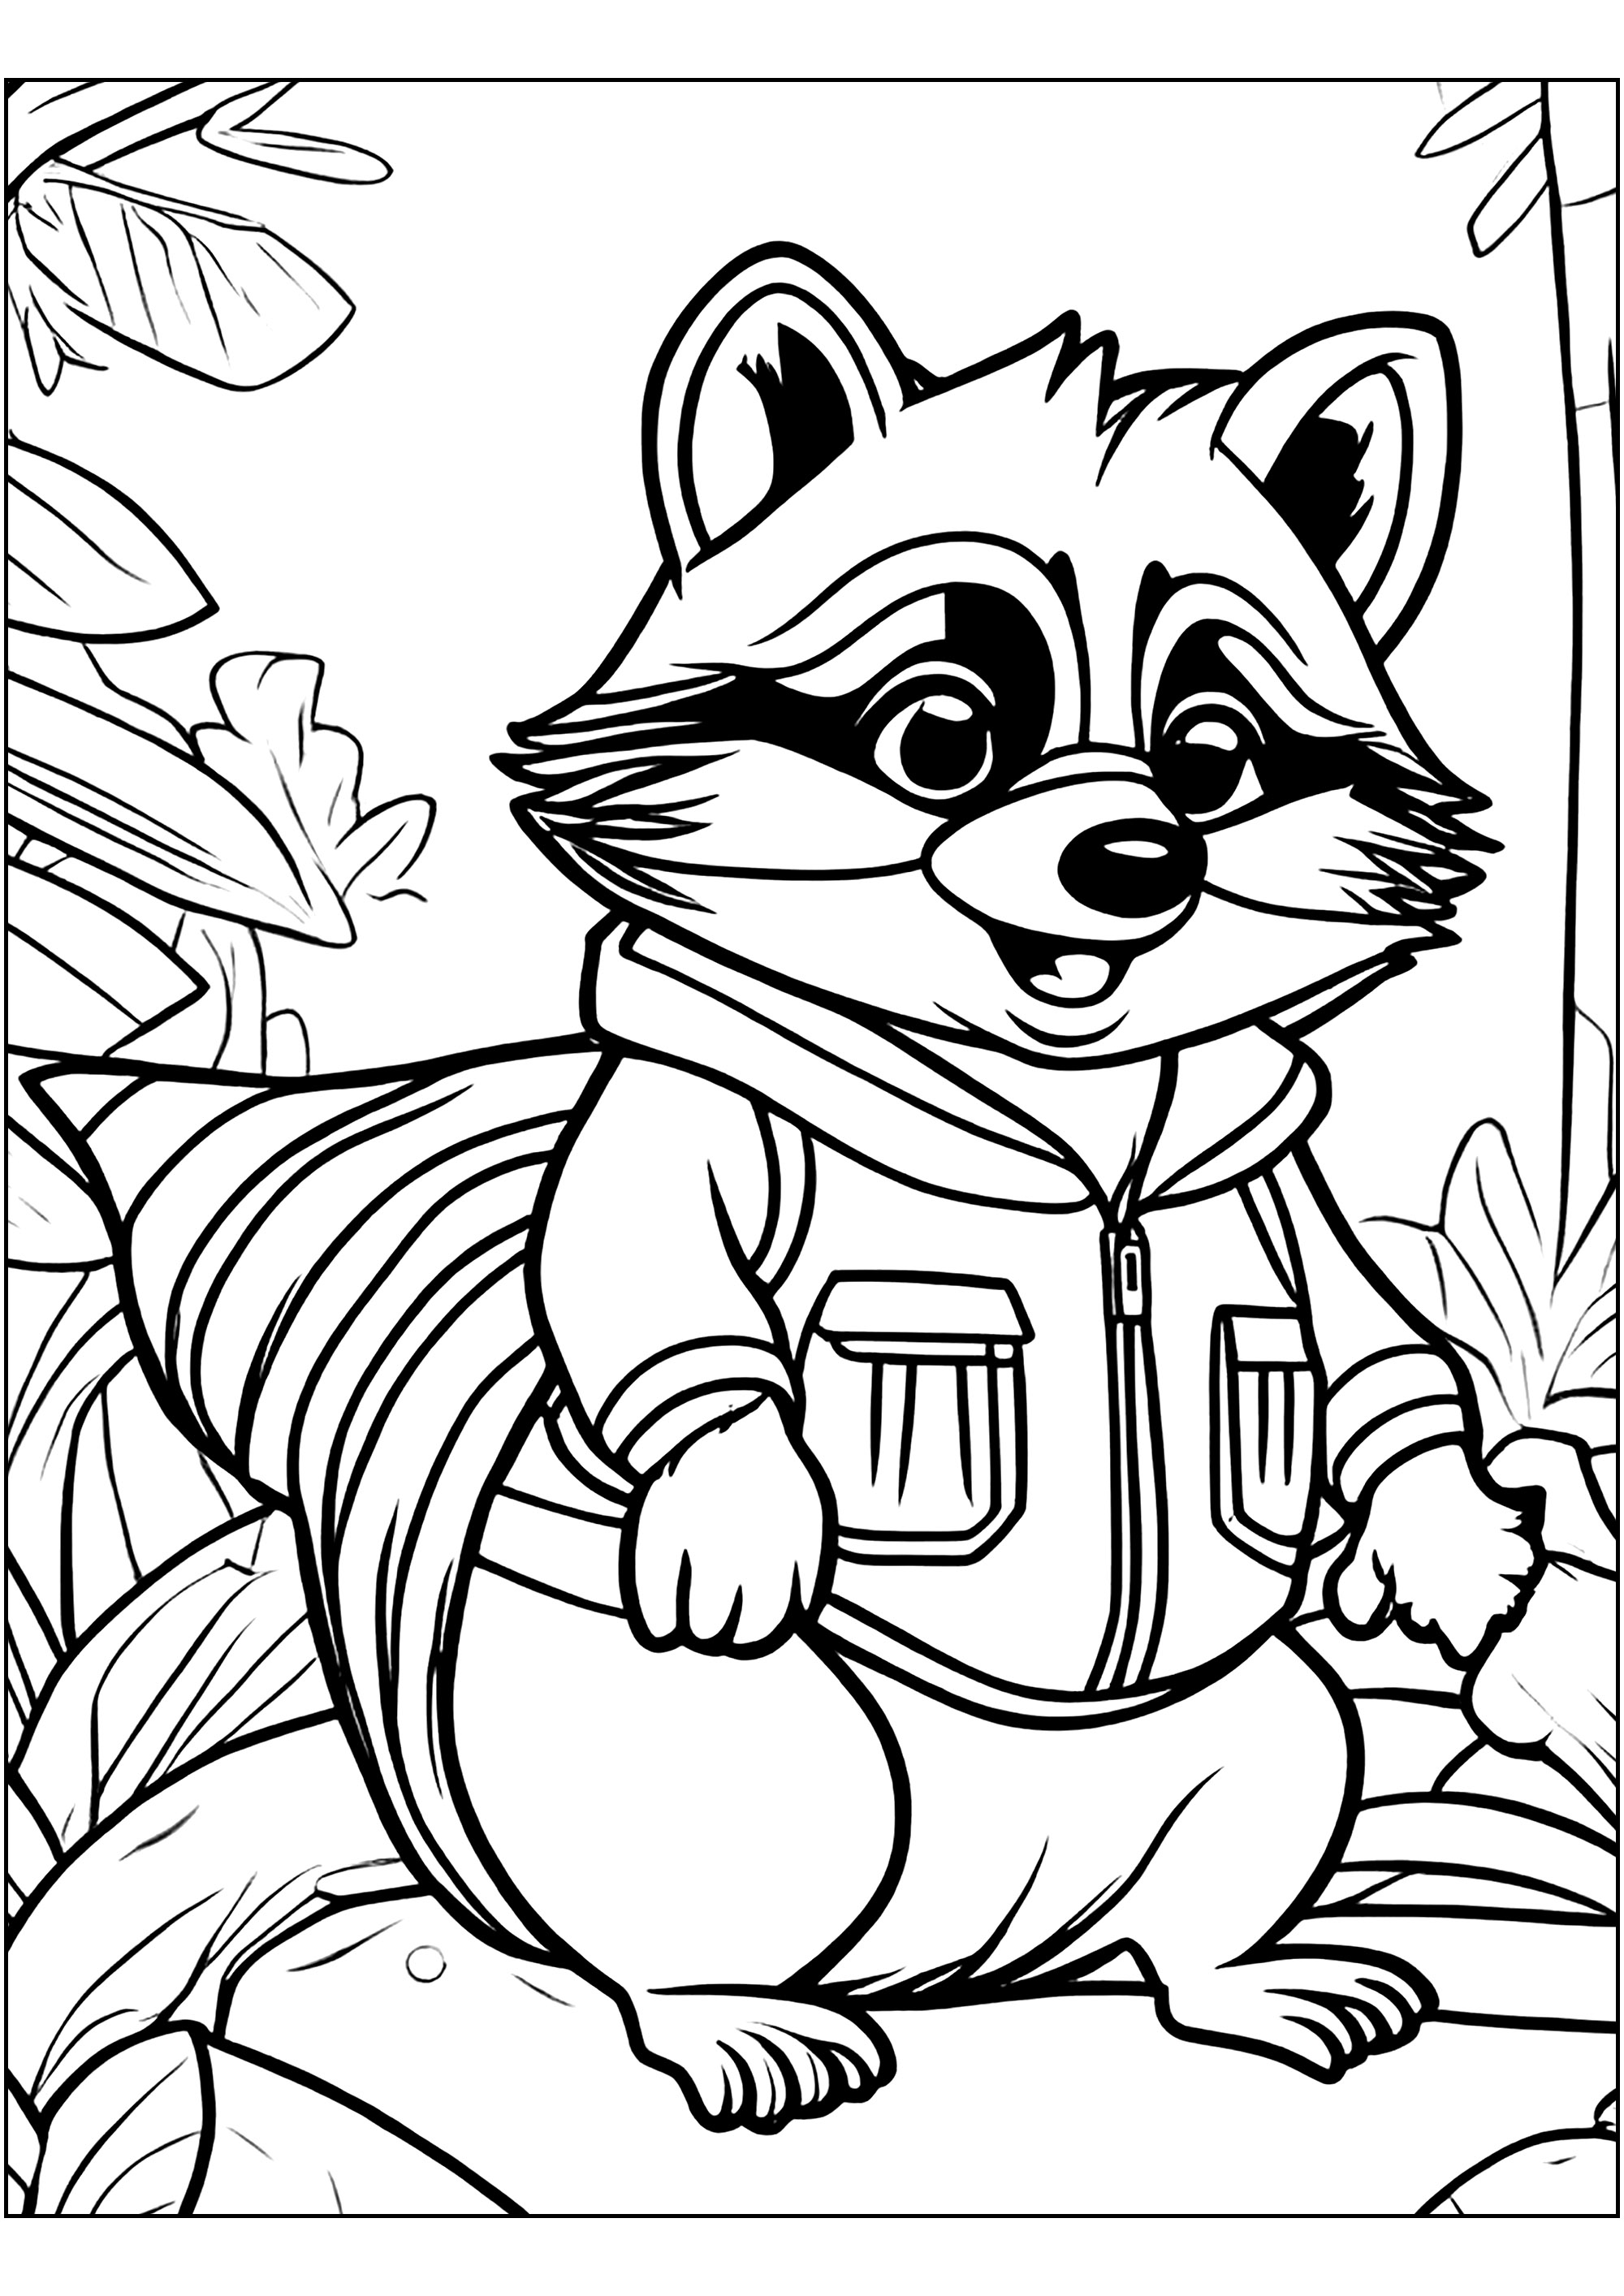 Raccoon: pattern with thick lines